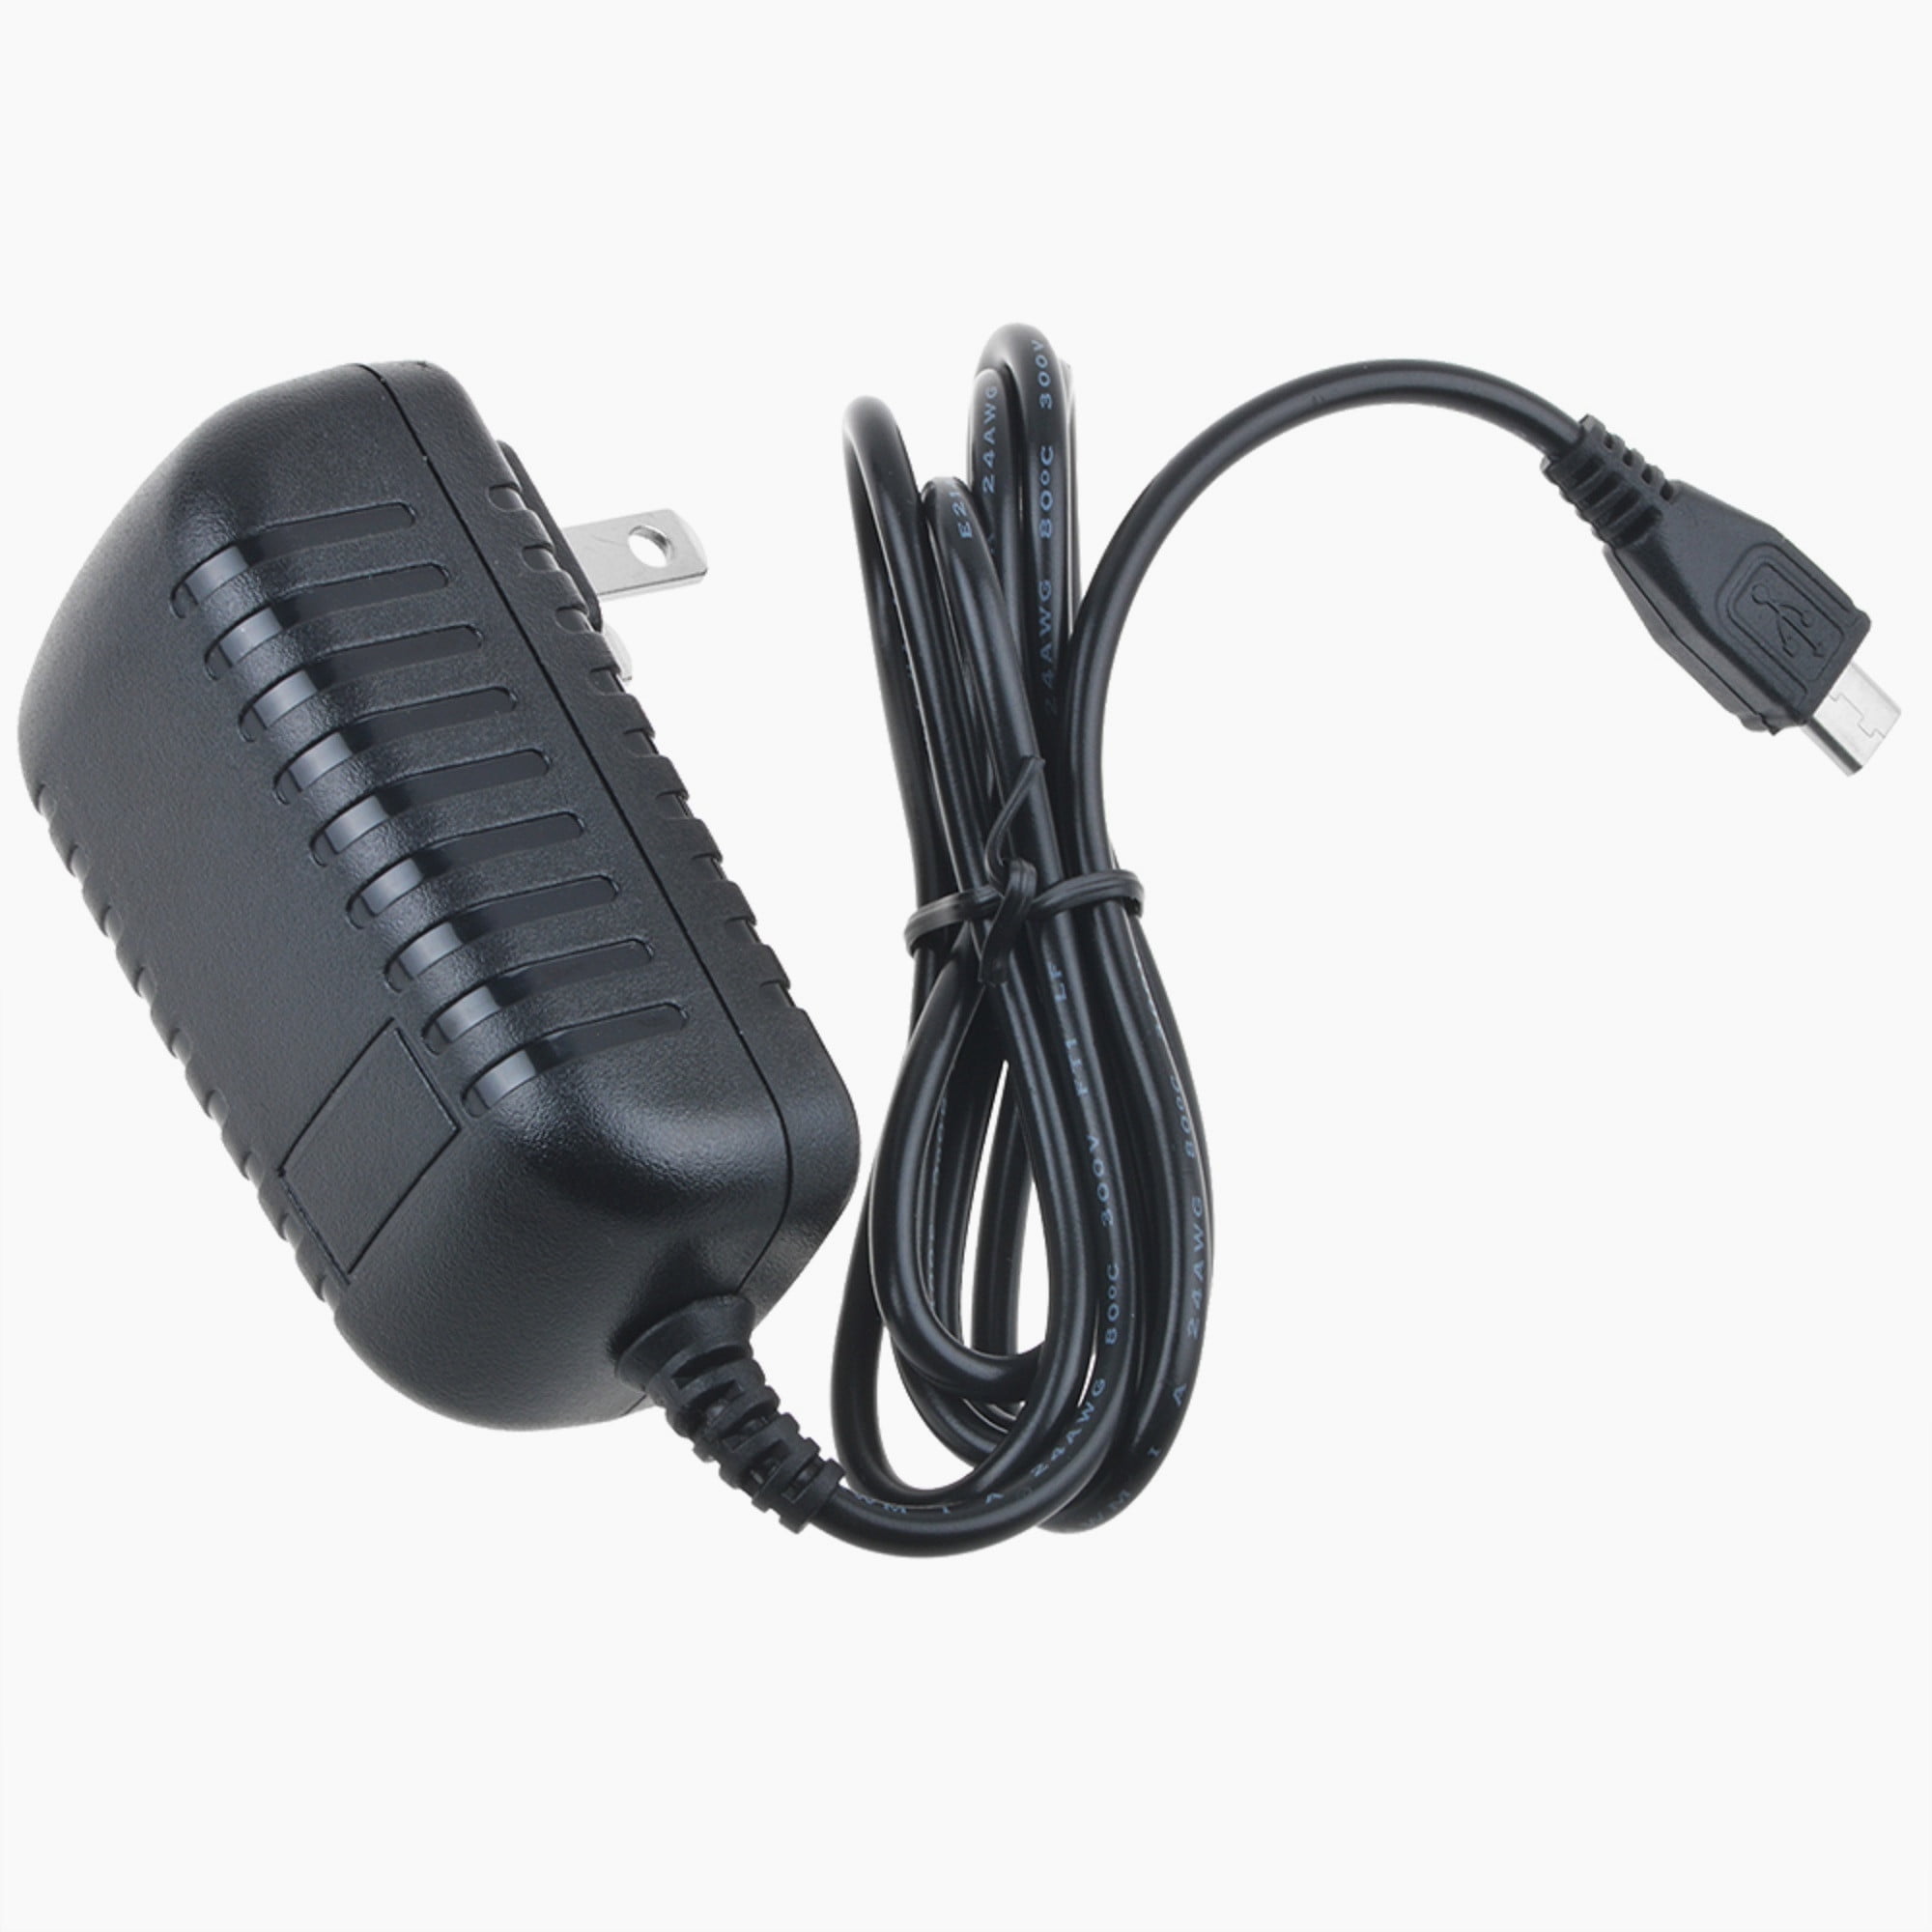 Car Charger AC Adapter Wall Power Supply For Magellan Roadmate 9412T-LM GPS 